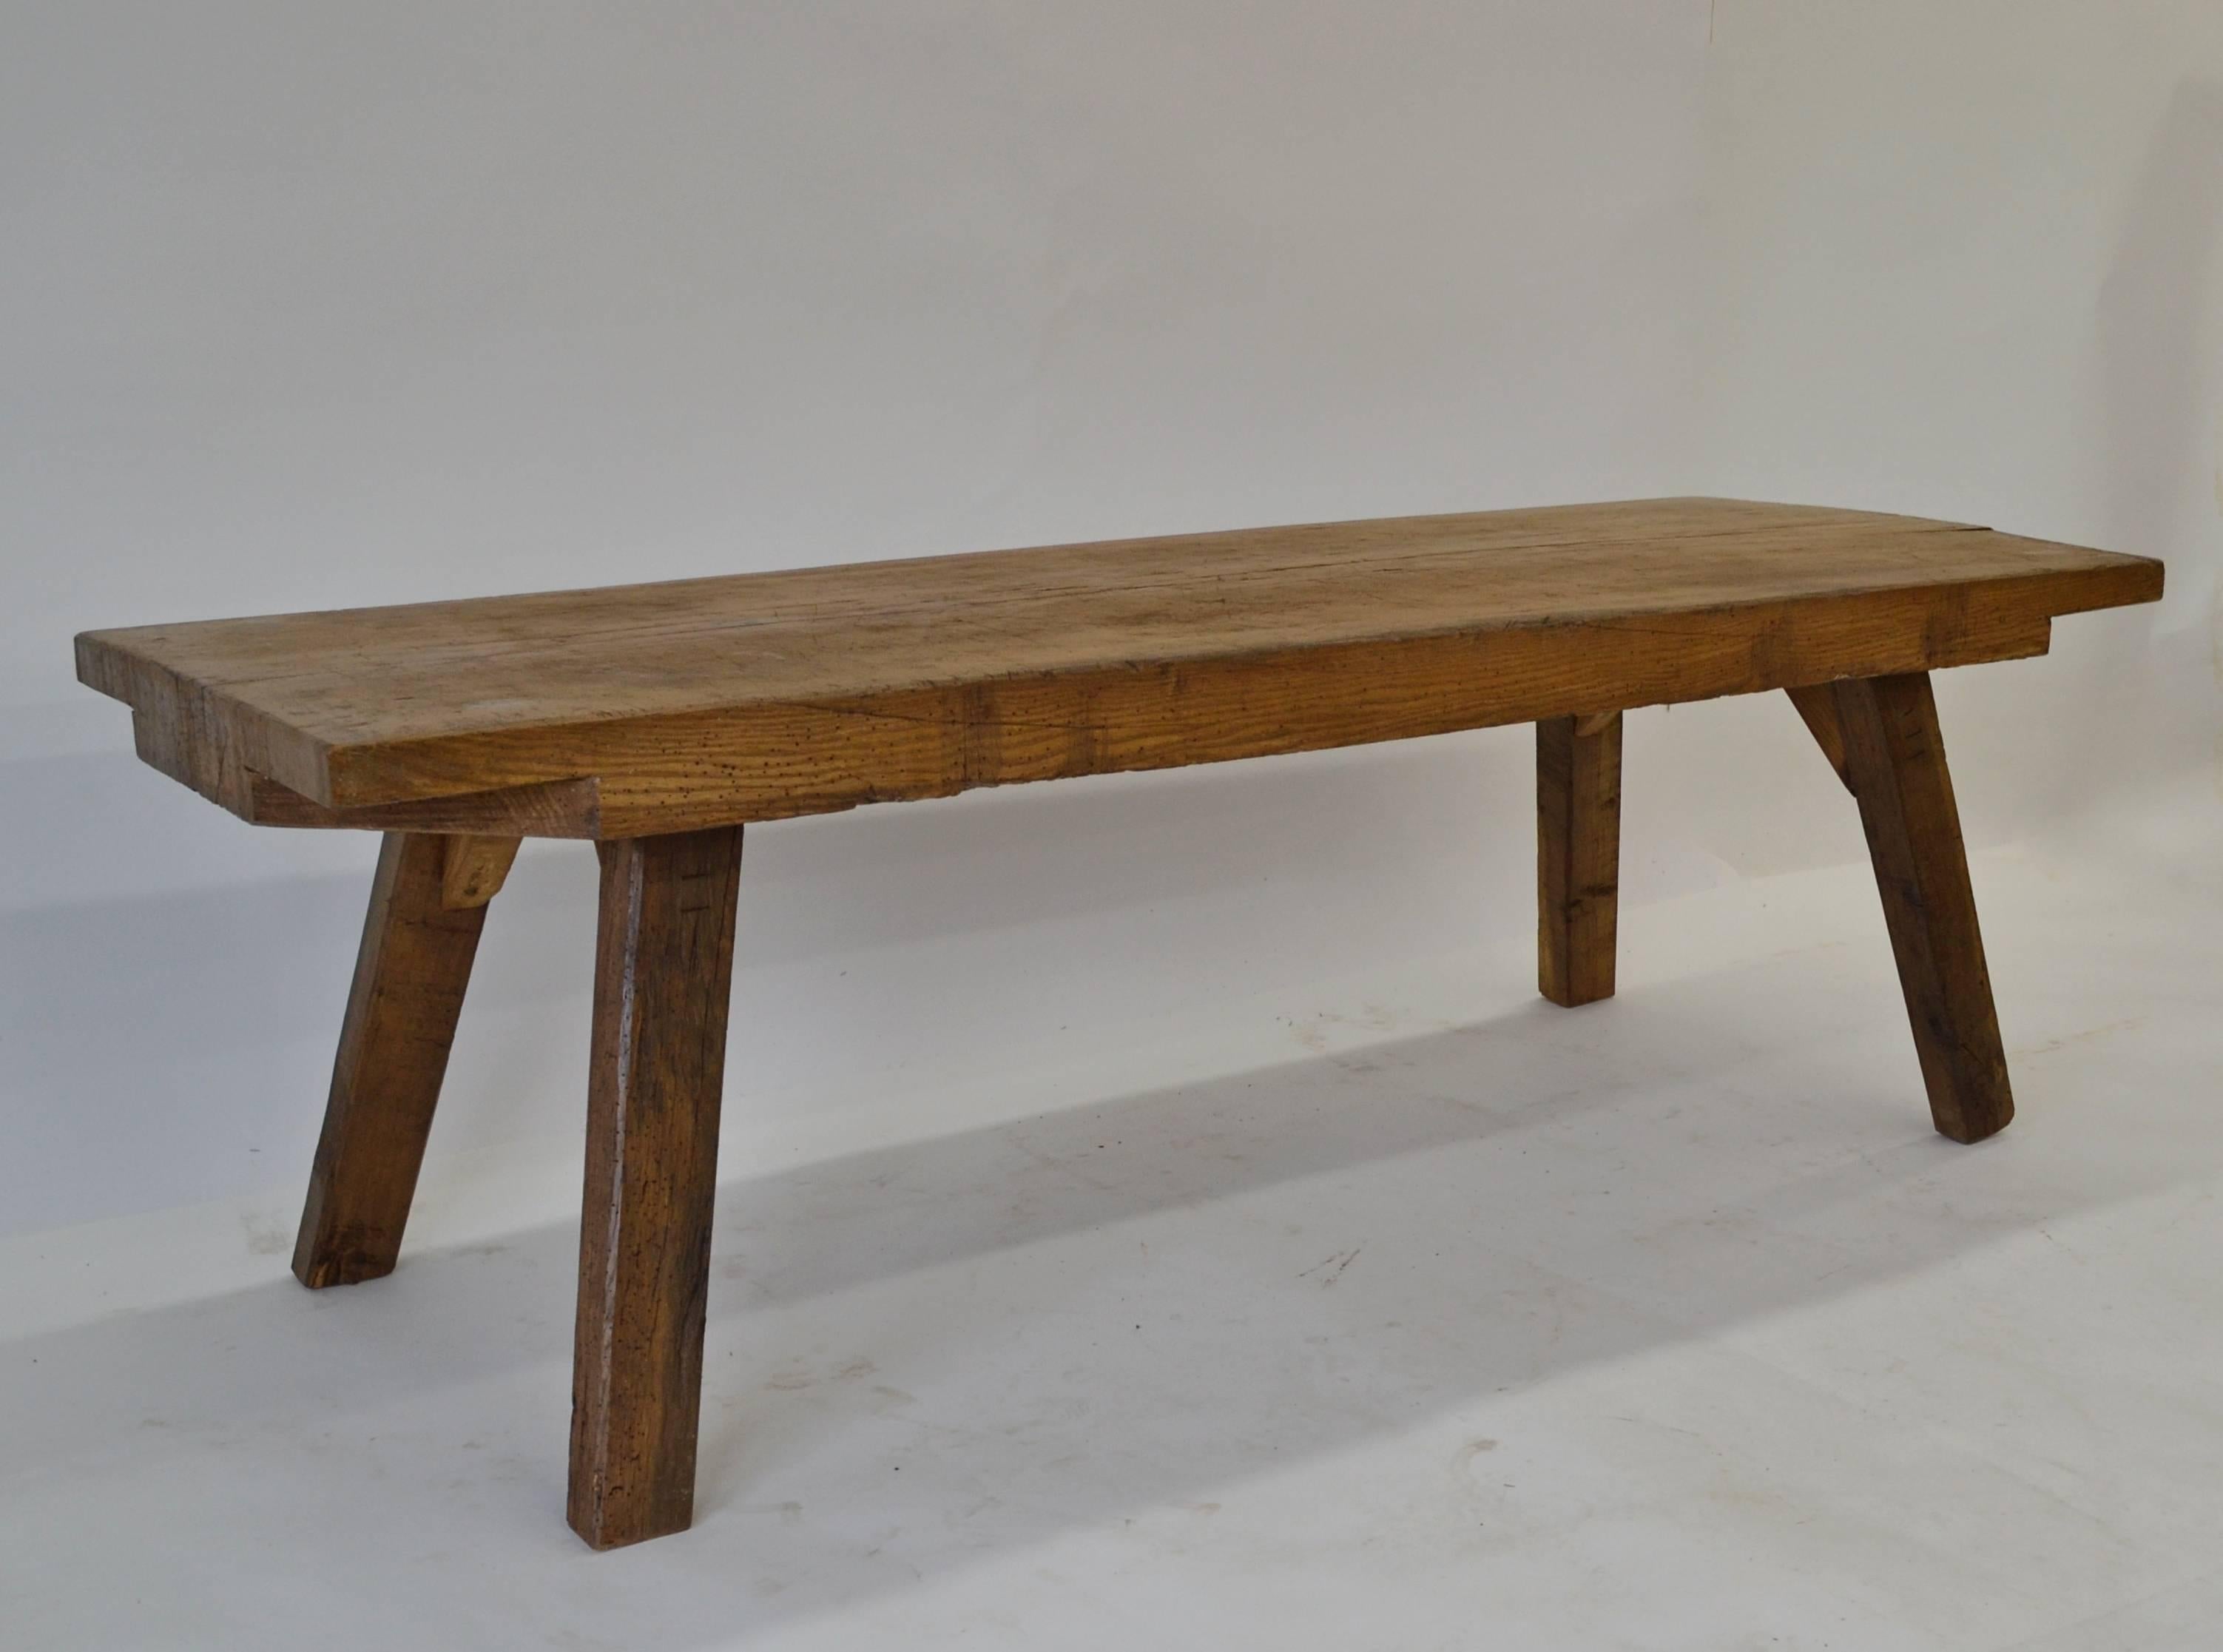 This is an outstanding cut down pig bench; one of the best we’ve ever had. Its 3” thick top, from a single board of oak, is scored, scratched and “dinged” all-over but it has never been subjected to heavy chopping so, at 20” high, is perfect as a